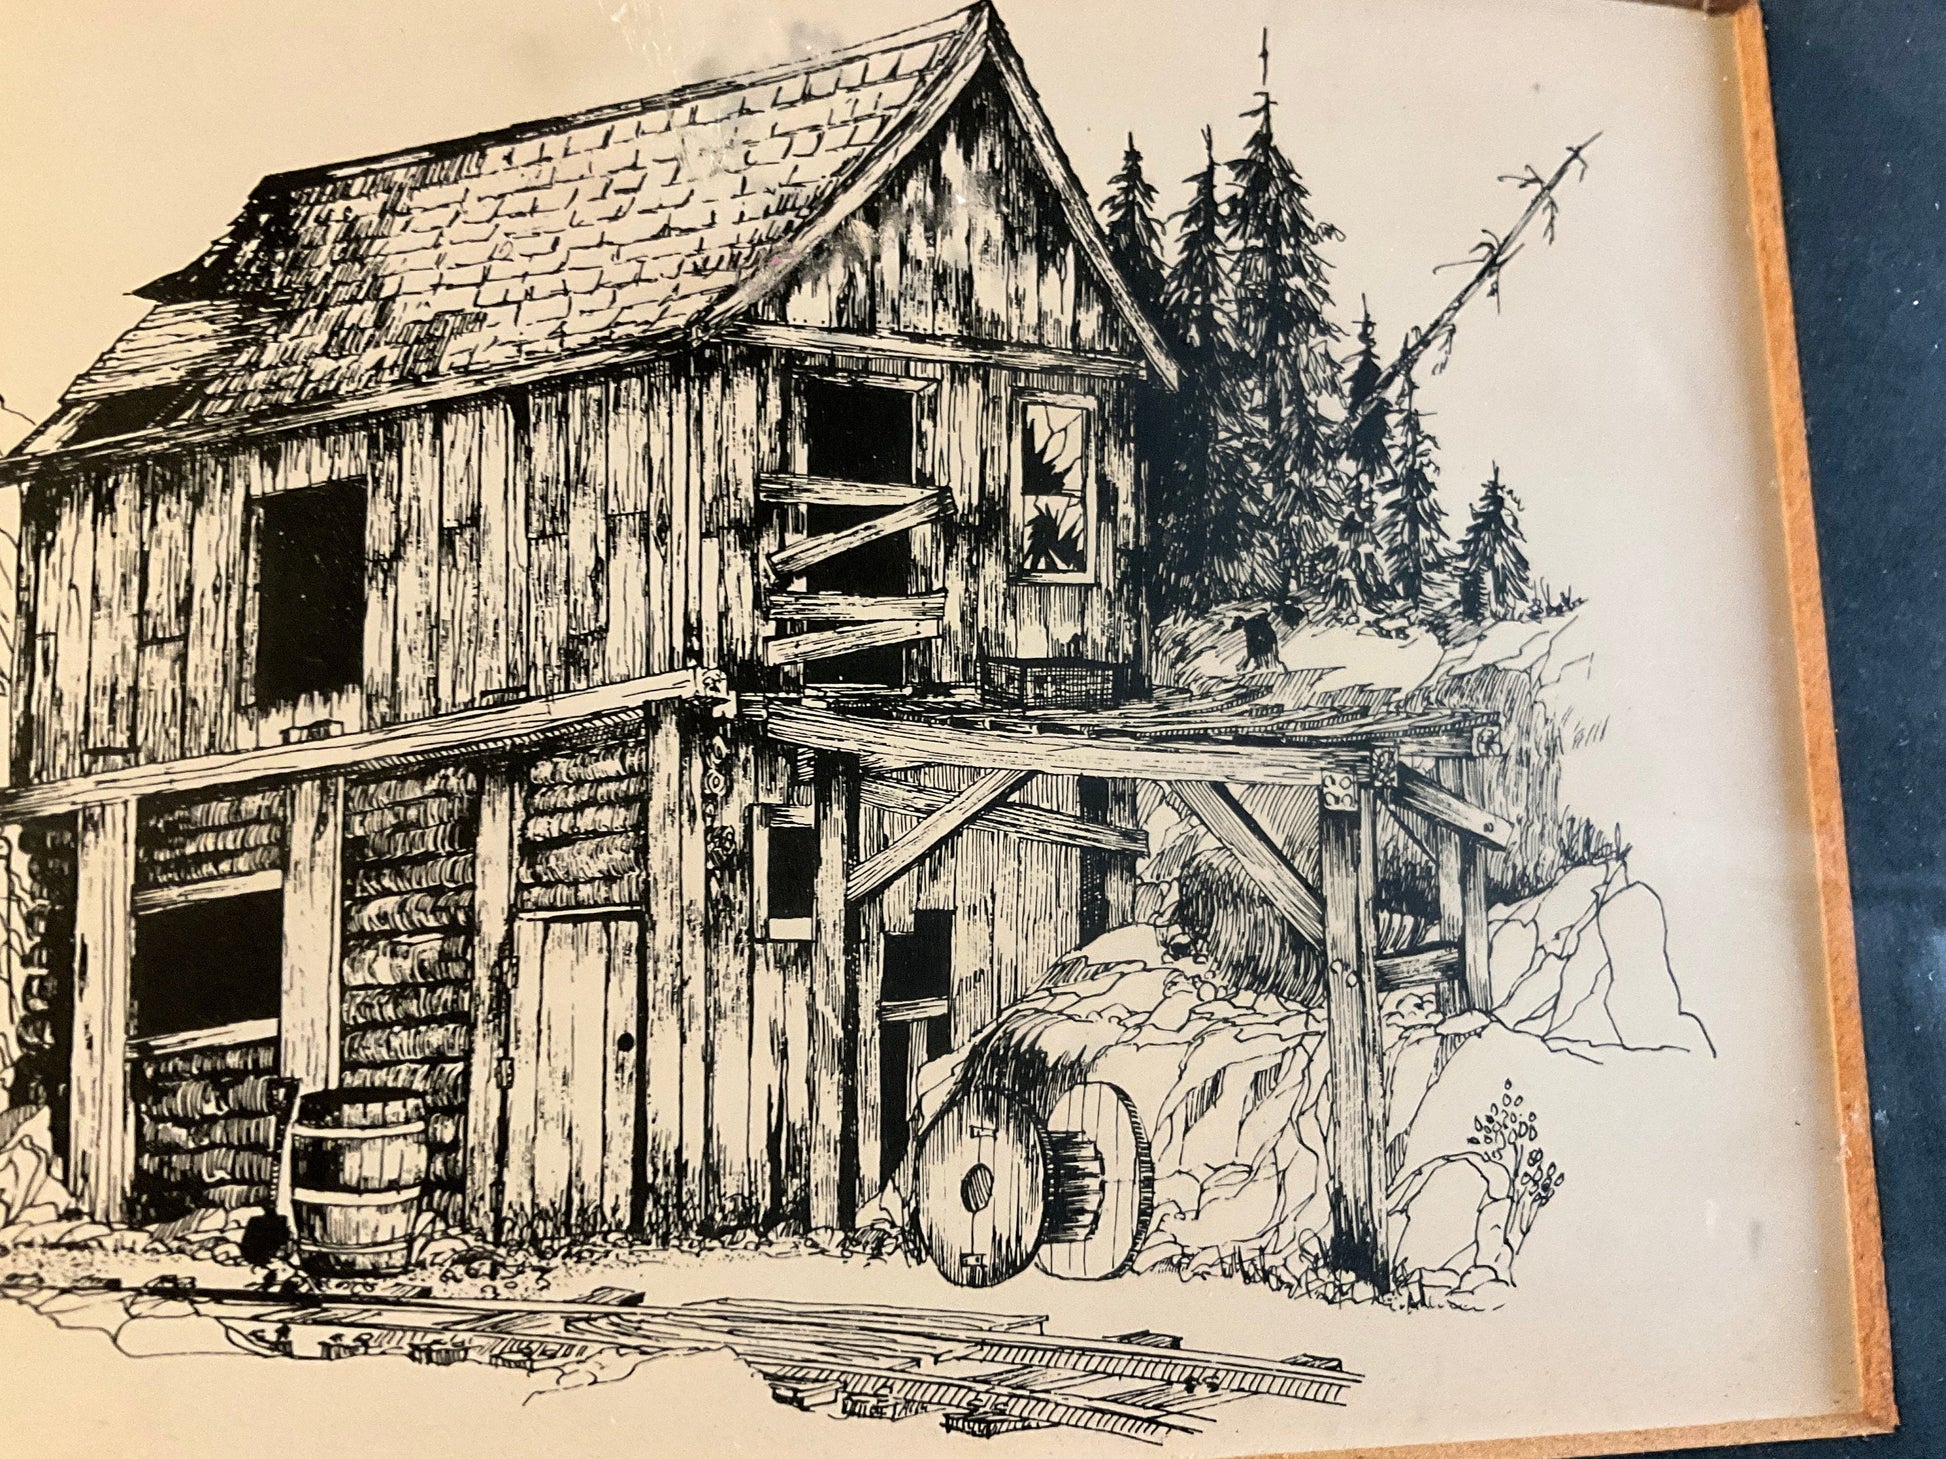 PE Gray Rustic Bank Barn Sketch vintage 1978 in aluminum frame 8.5 by 6.5 inches